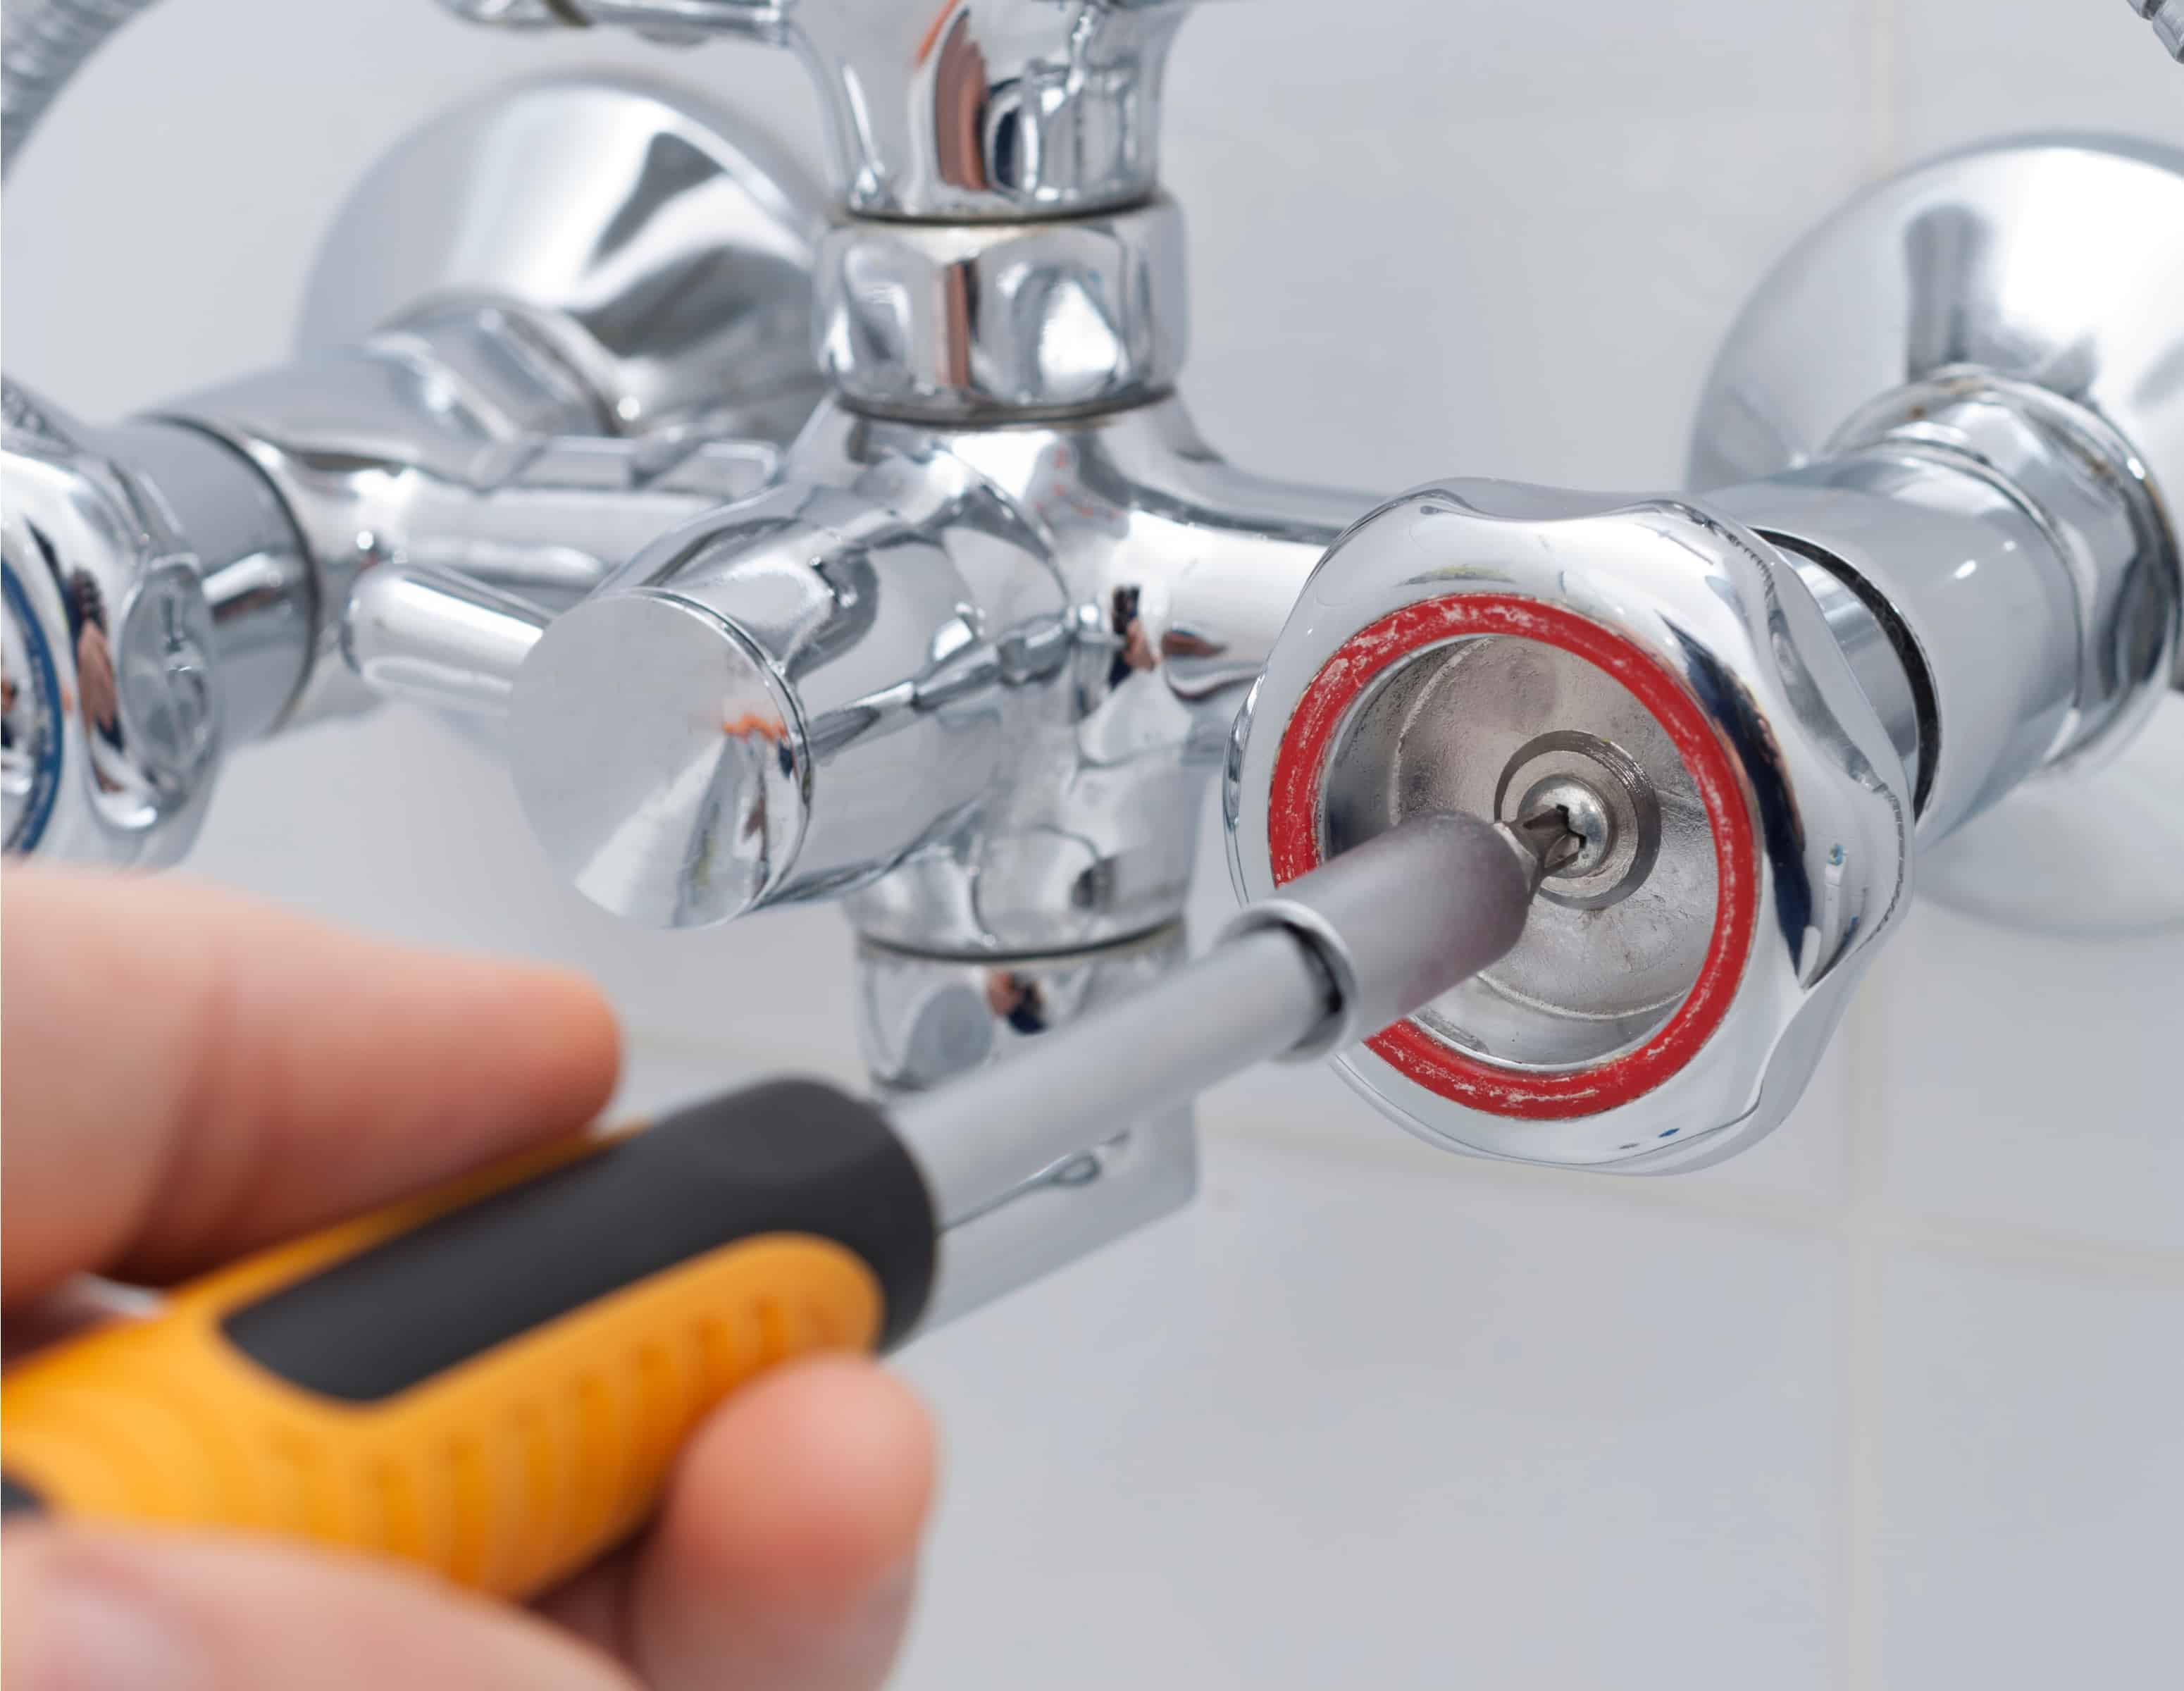 5 Easy Steps To Fix A Leaky Shower Faucet, How To Fix A Leaking Single Handle Bathtub Faucet